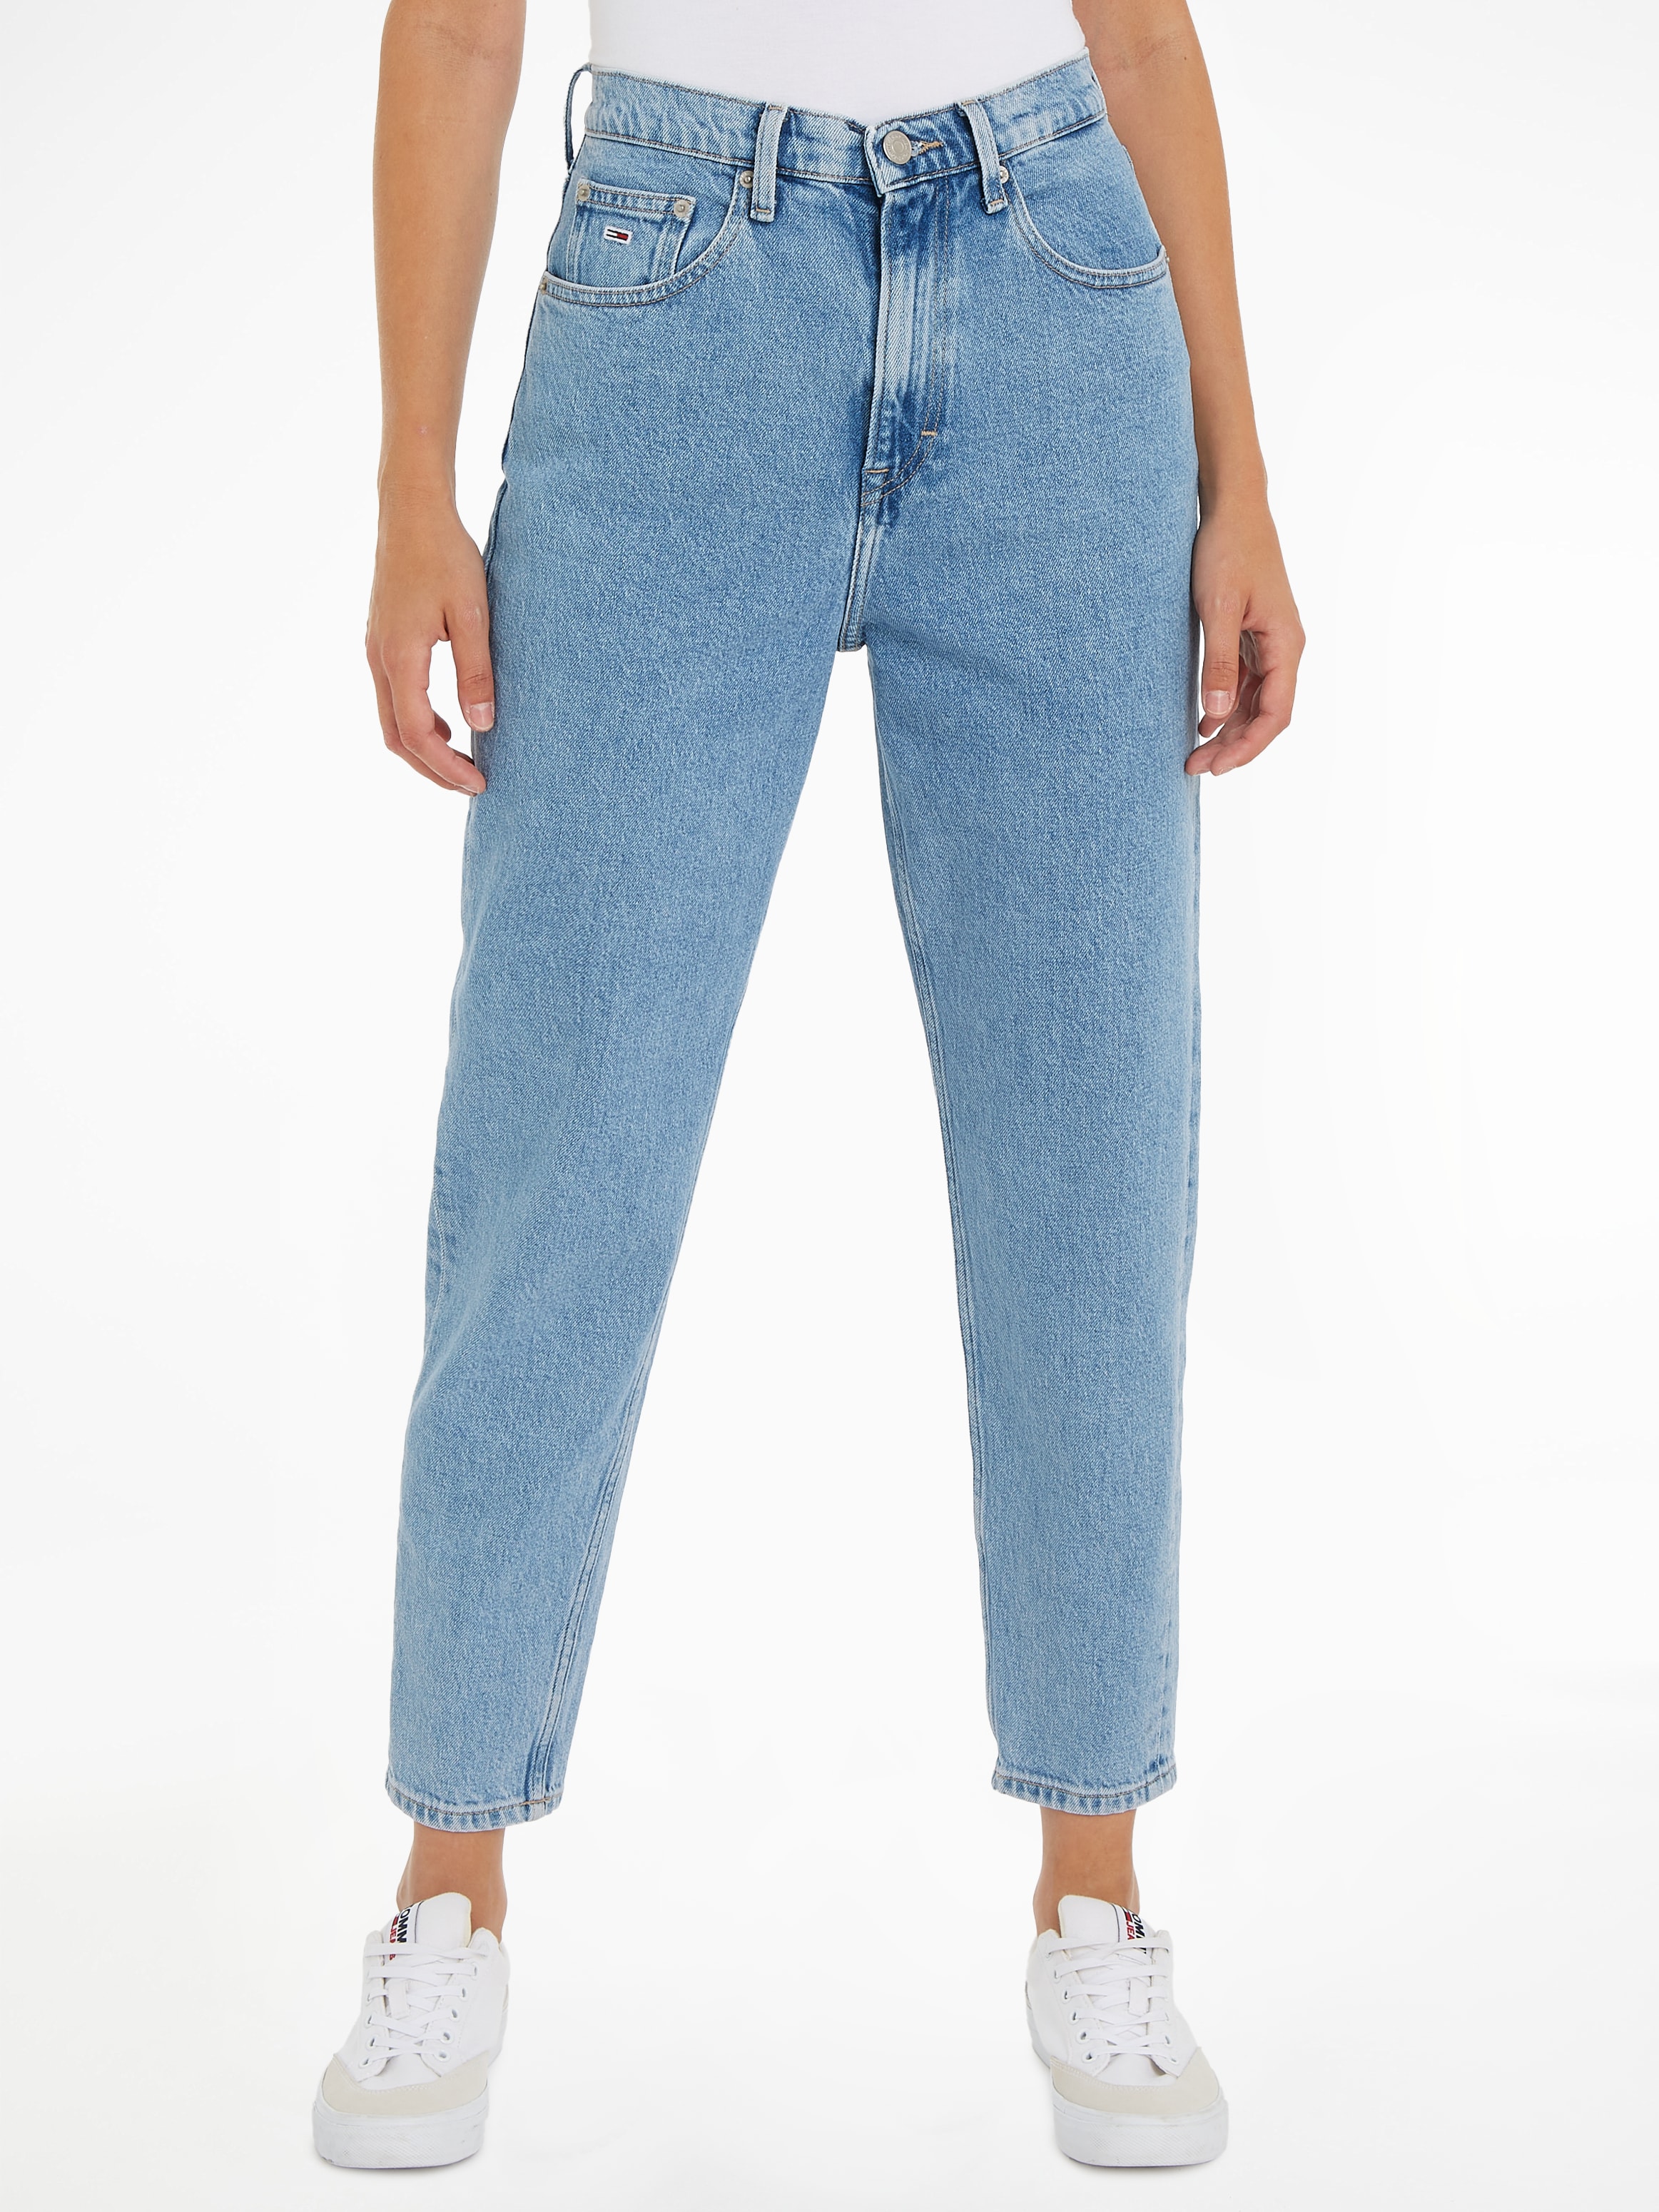 Jeans online Logopatch Mom-Jeans DG«, TPR UH Tommy »MOM JEAN mit kaufen